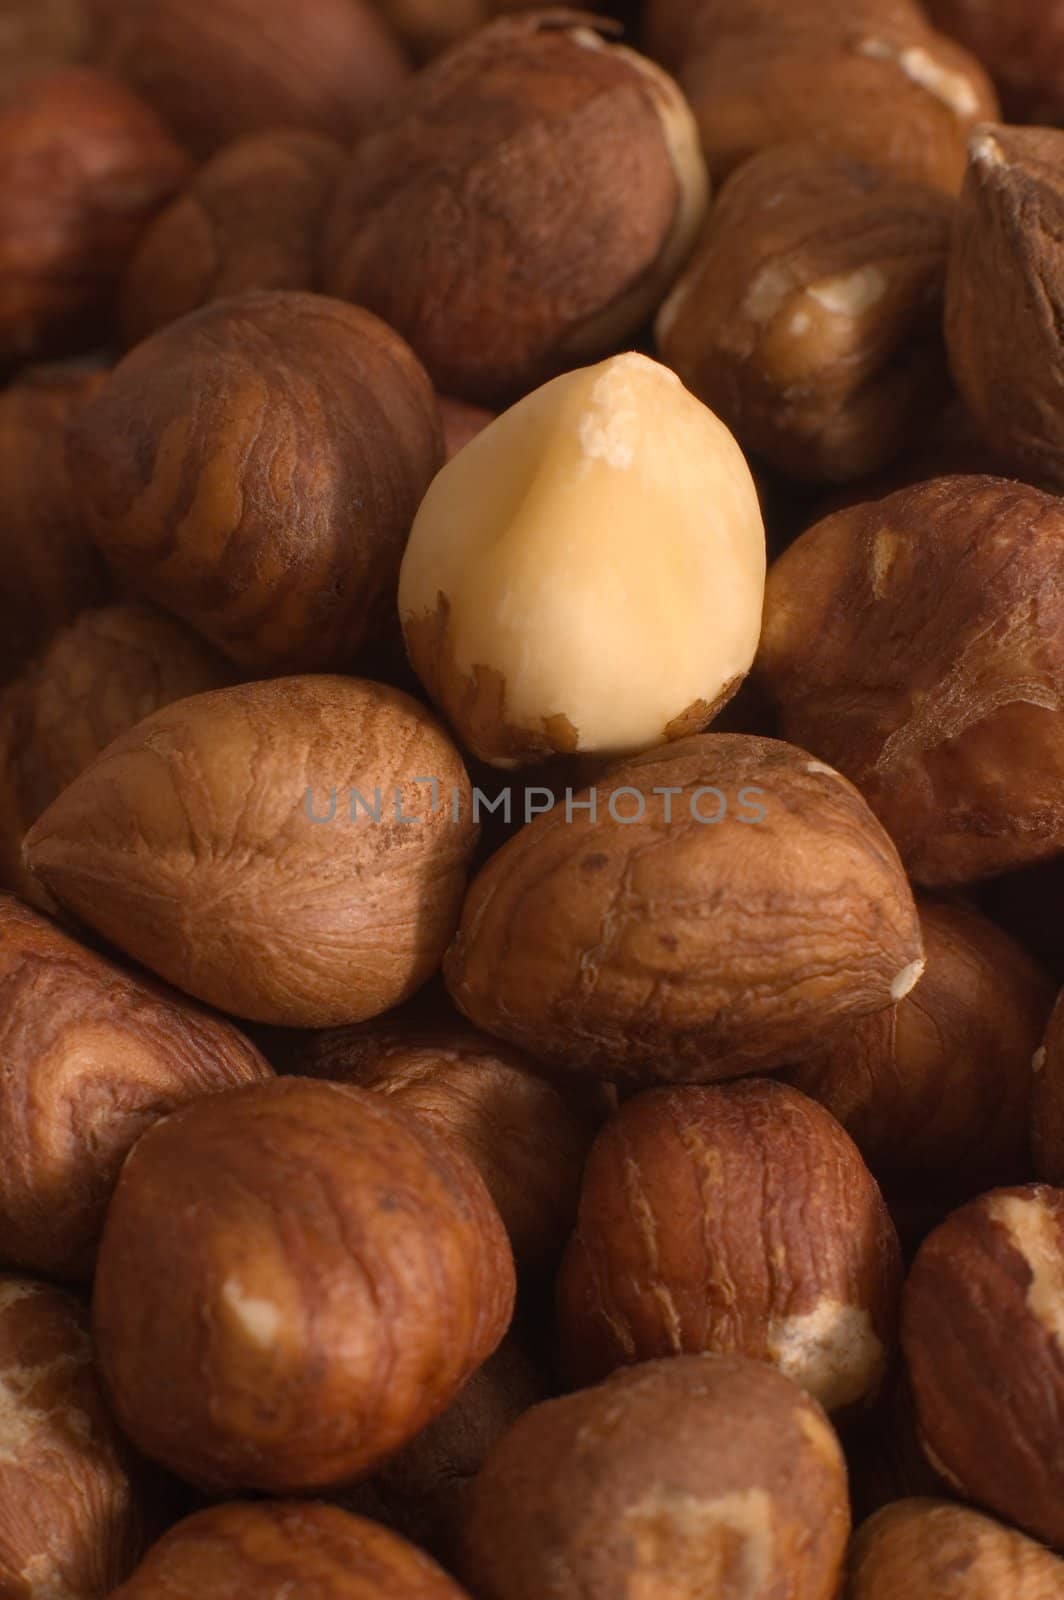 multiple filbert nuts background, one nut is different